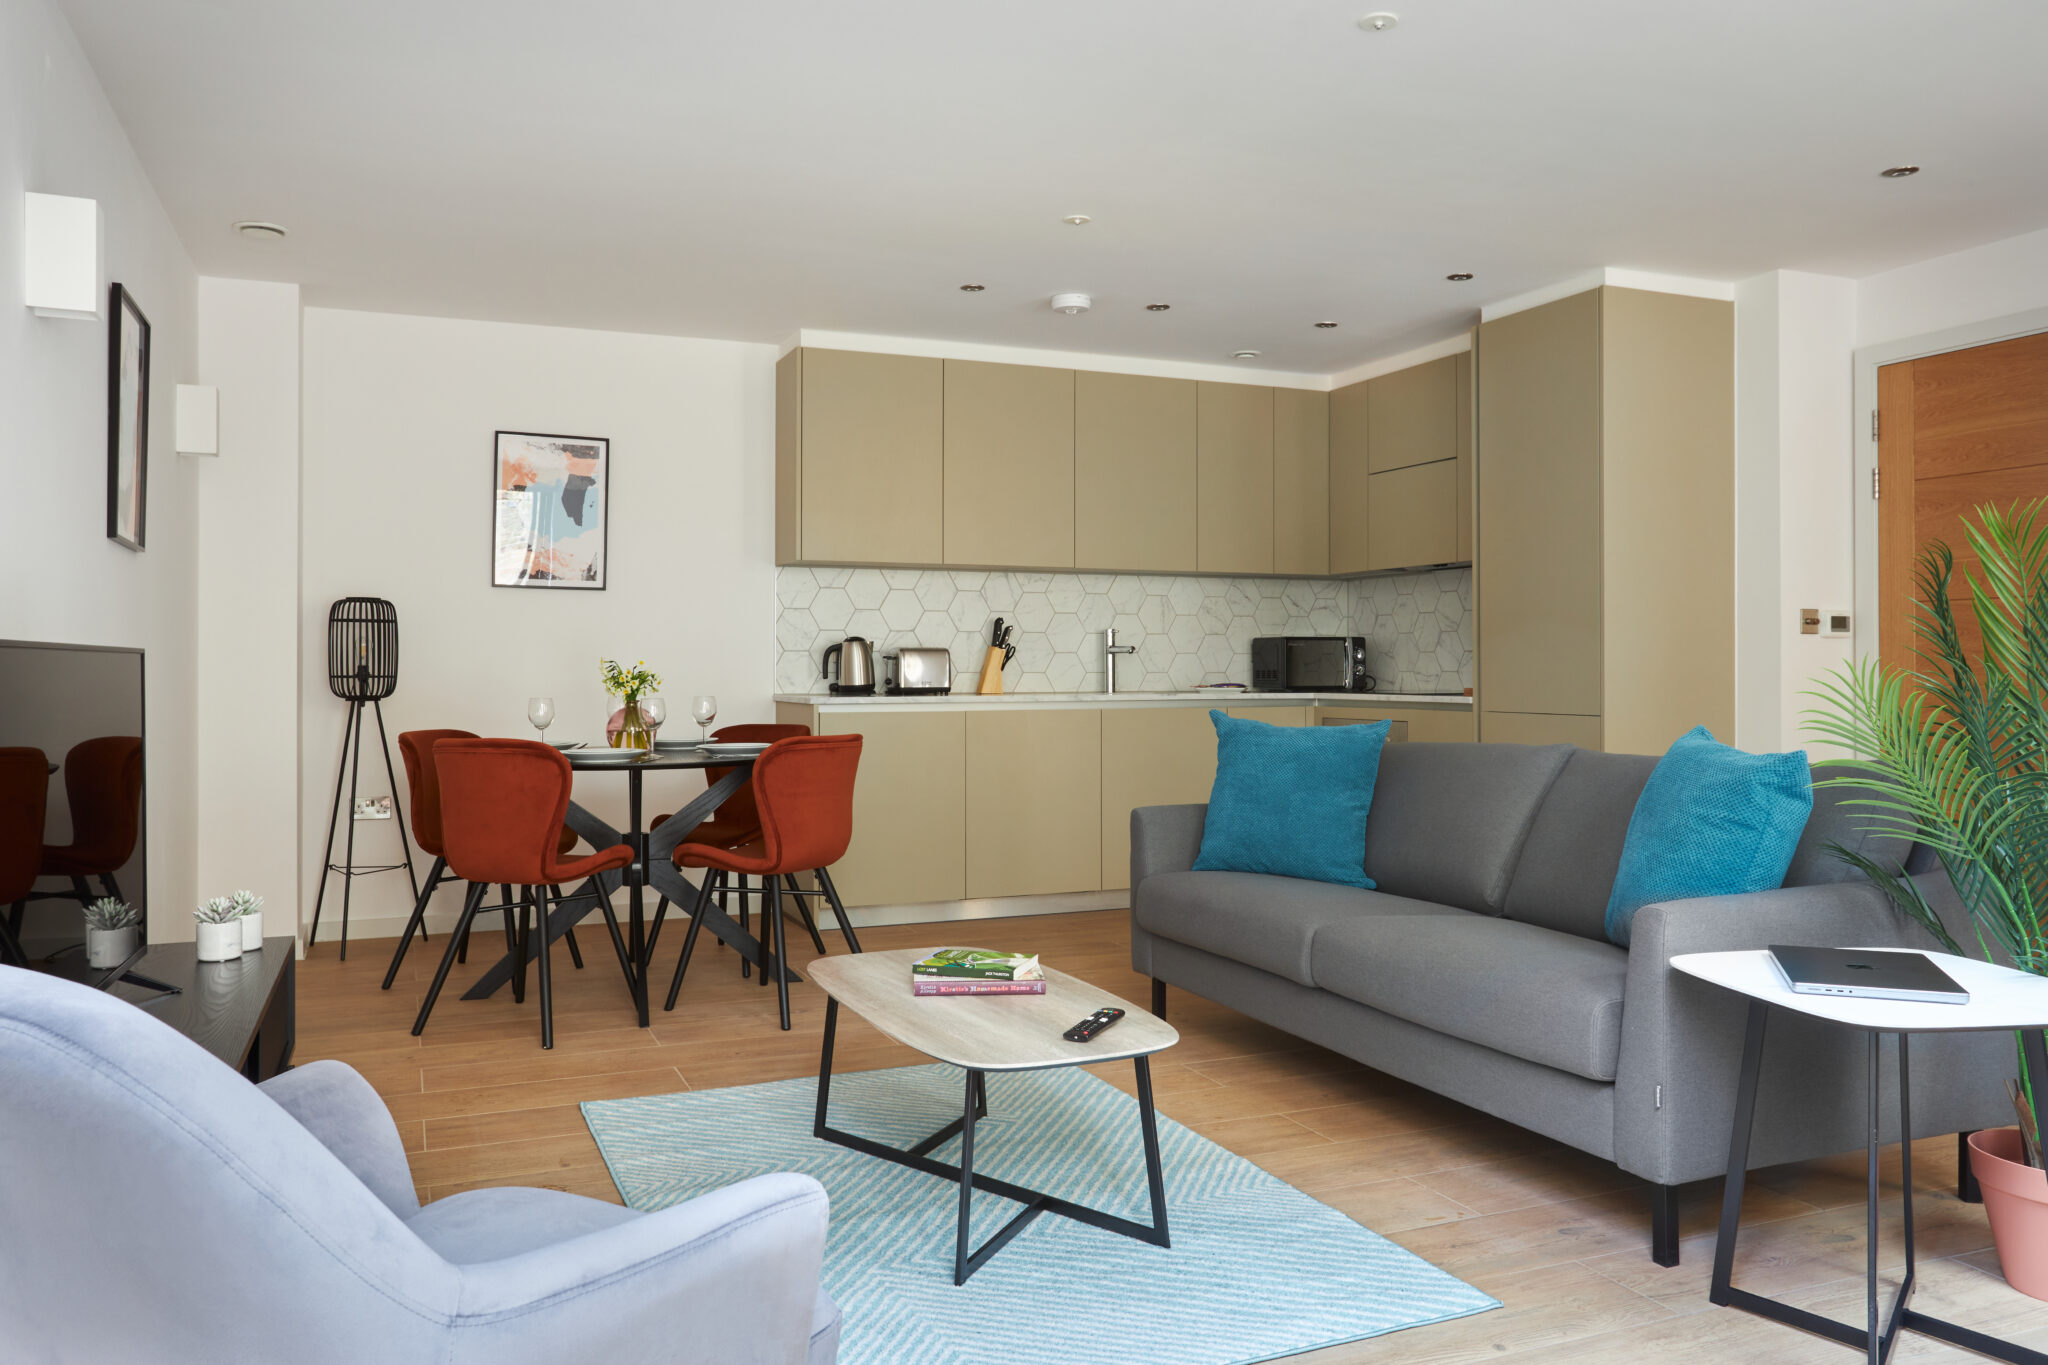 Hammersmith Short-Lets Accommodations showcases expert interior design with contemporary, comfortable furnishings. ideal for relaxation. Book Now +44 (0) 208 691 3920